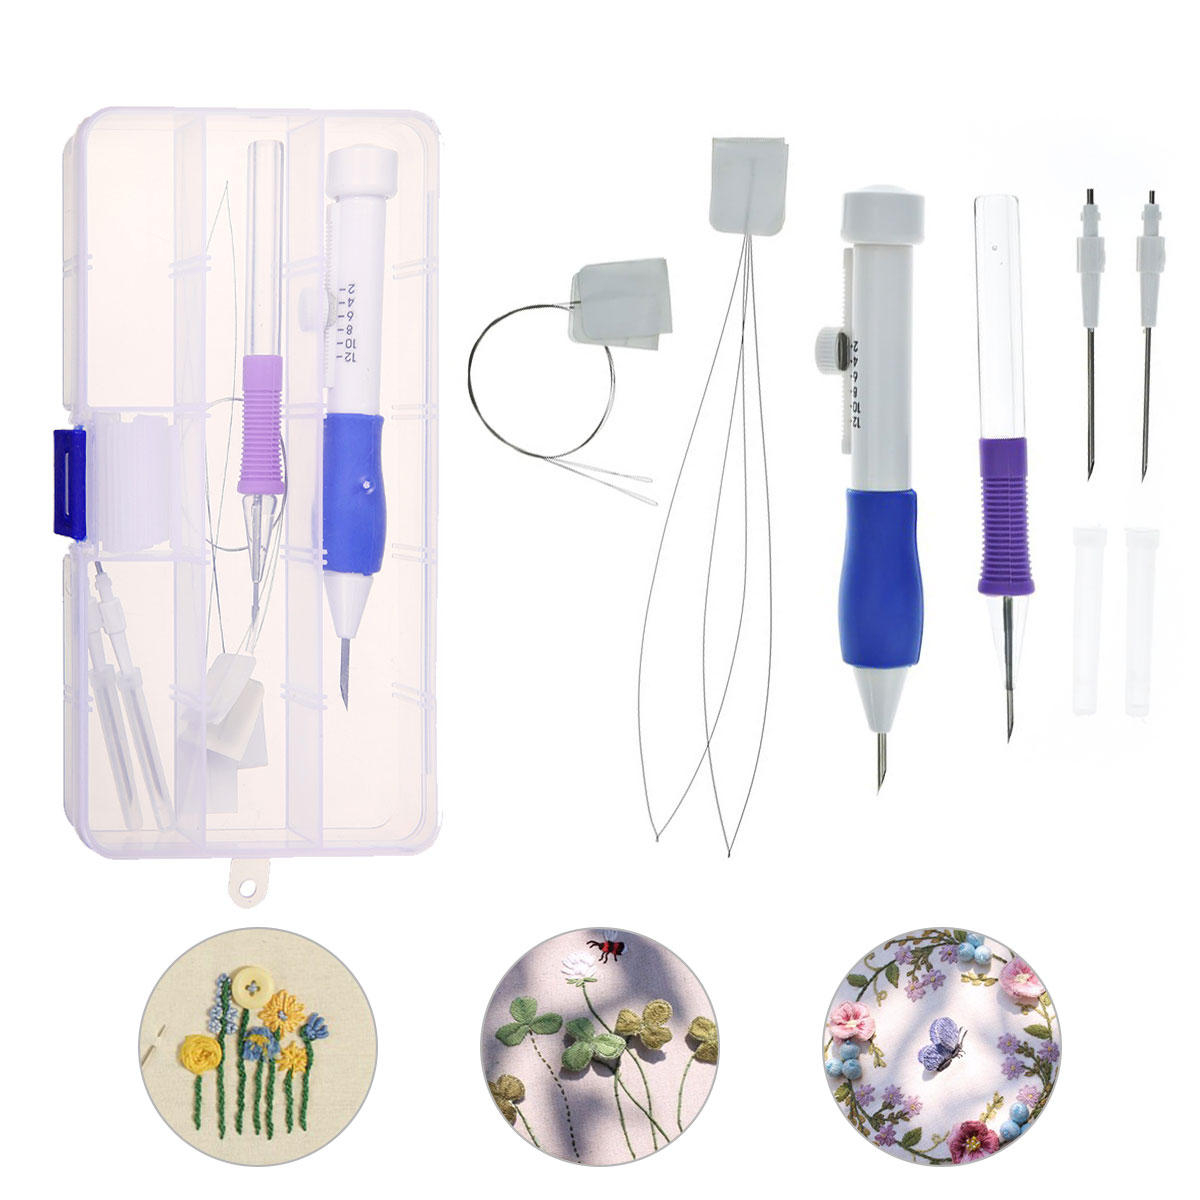 Embroidery Patterns Online Magic Embroidery Pen Punch Needle Set Embroidery Patterns Punch Needle Kit Knitting Sewing Diy Tool